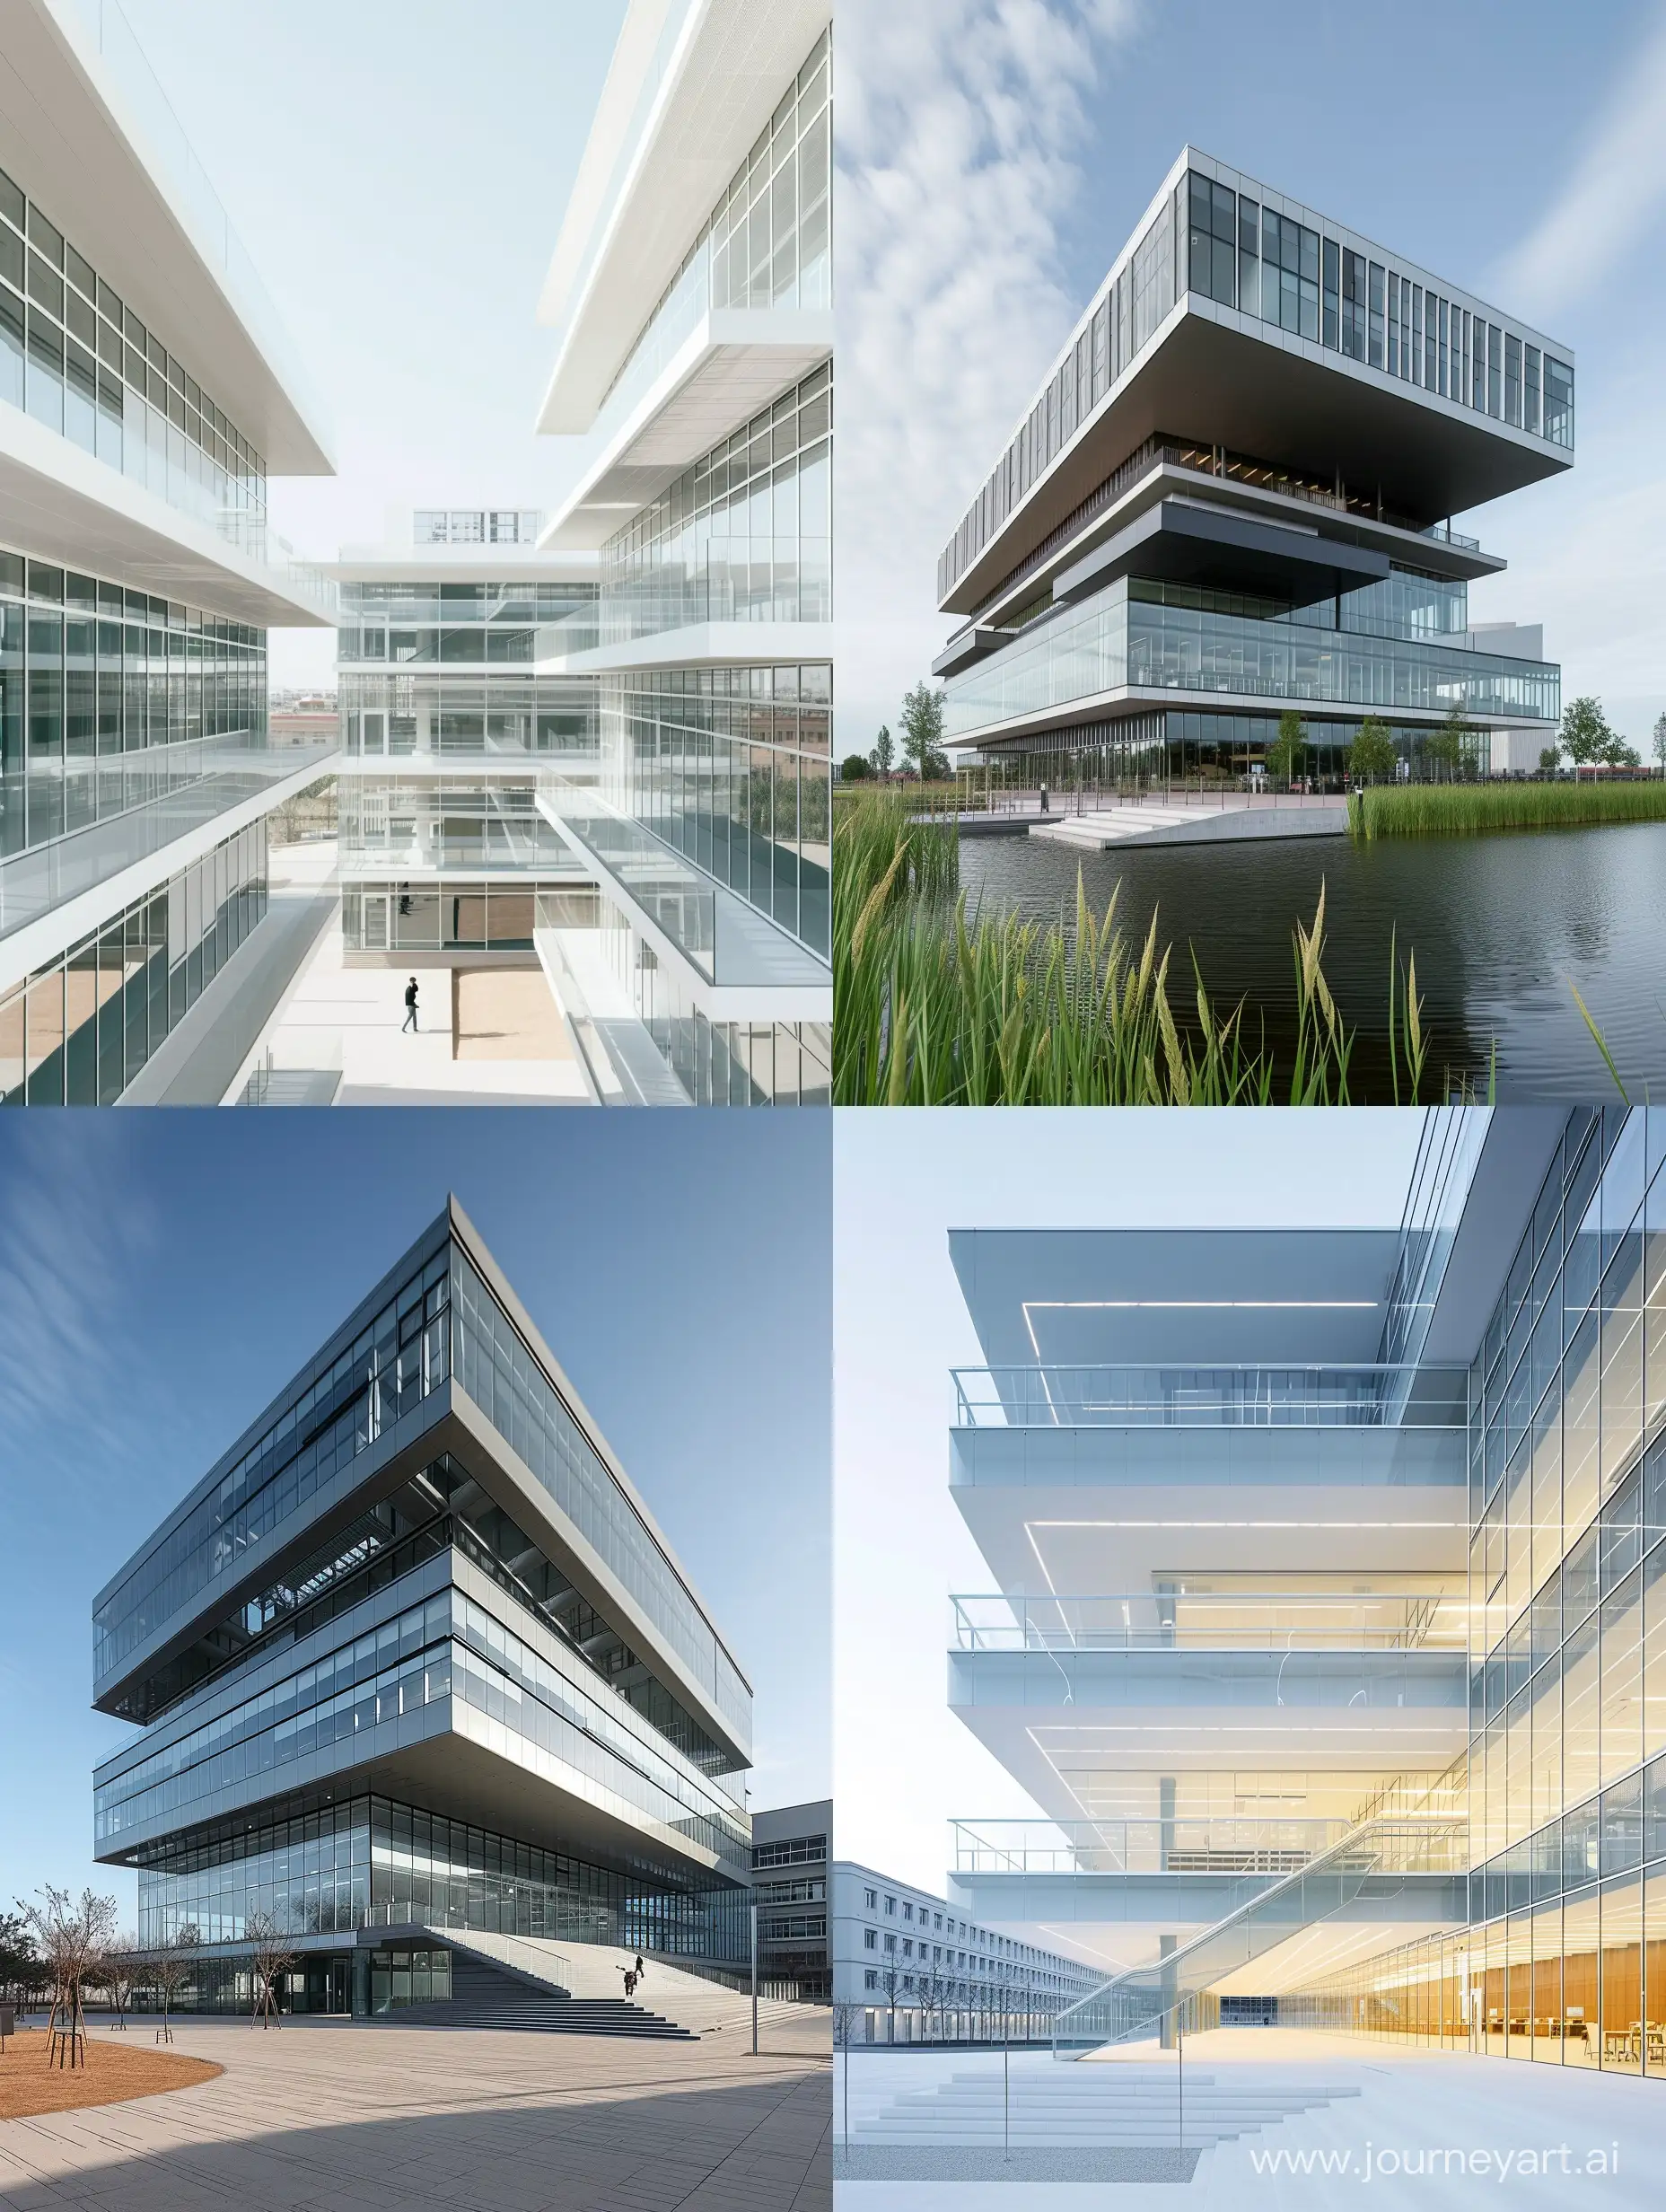 Modern-Architectural-Marvel-8Floor-Building-Contest-with-Clean-Lines-and-Open-Spaces